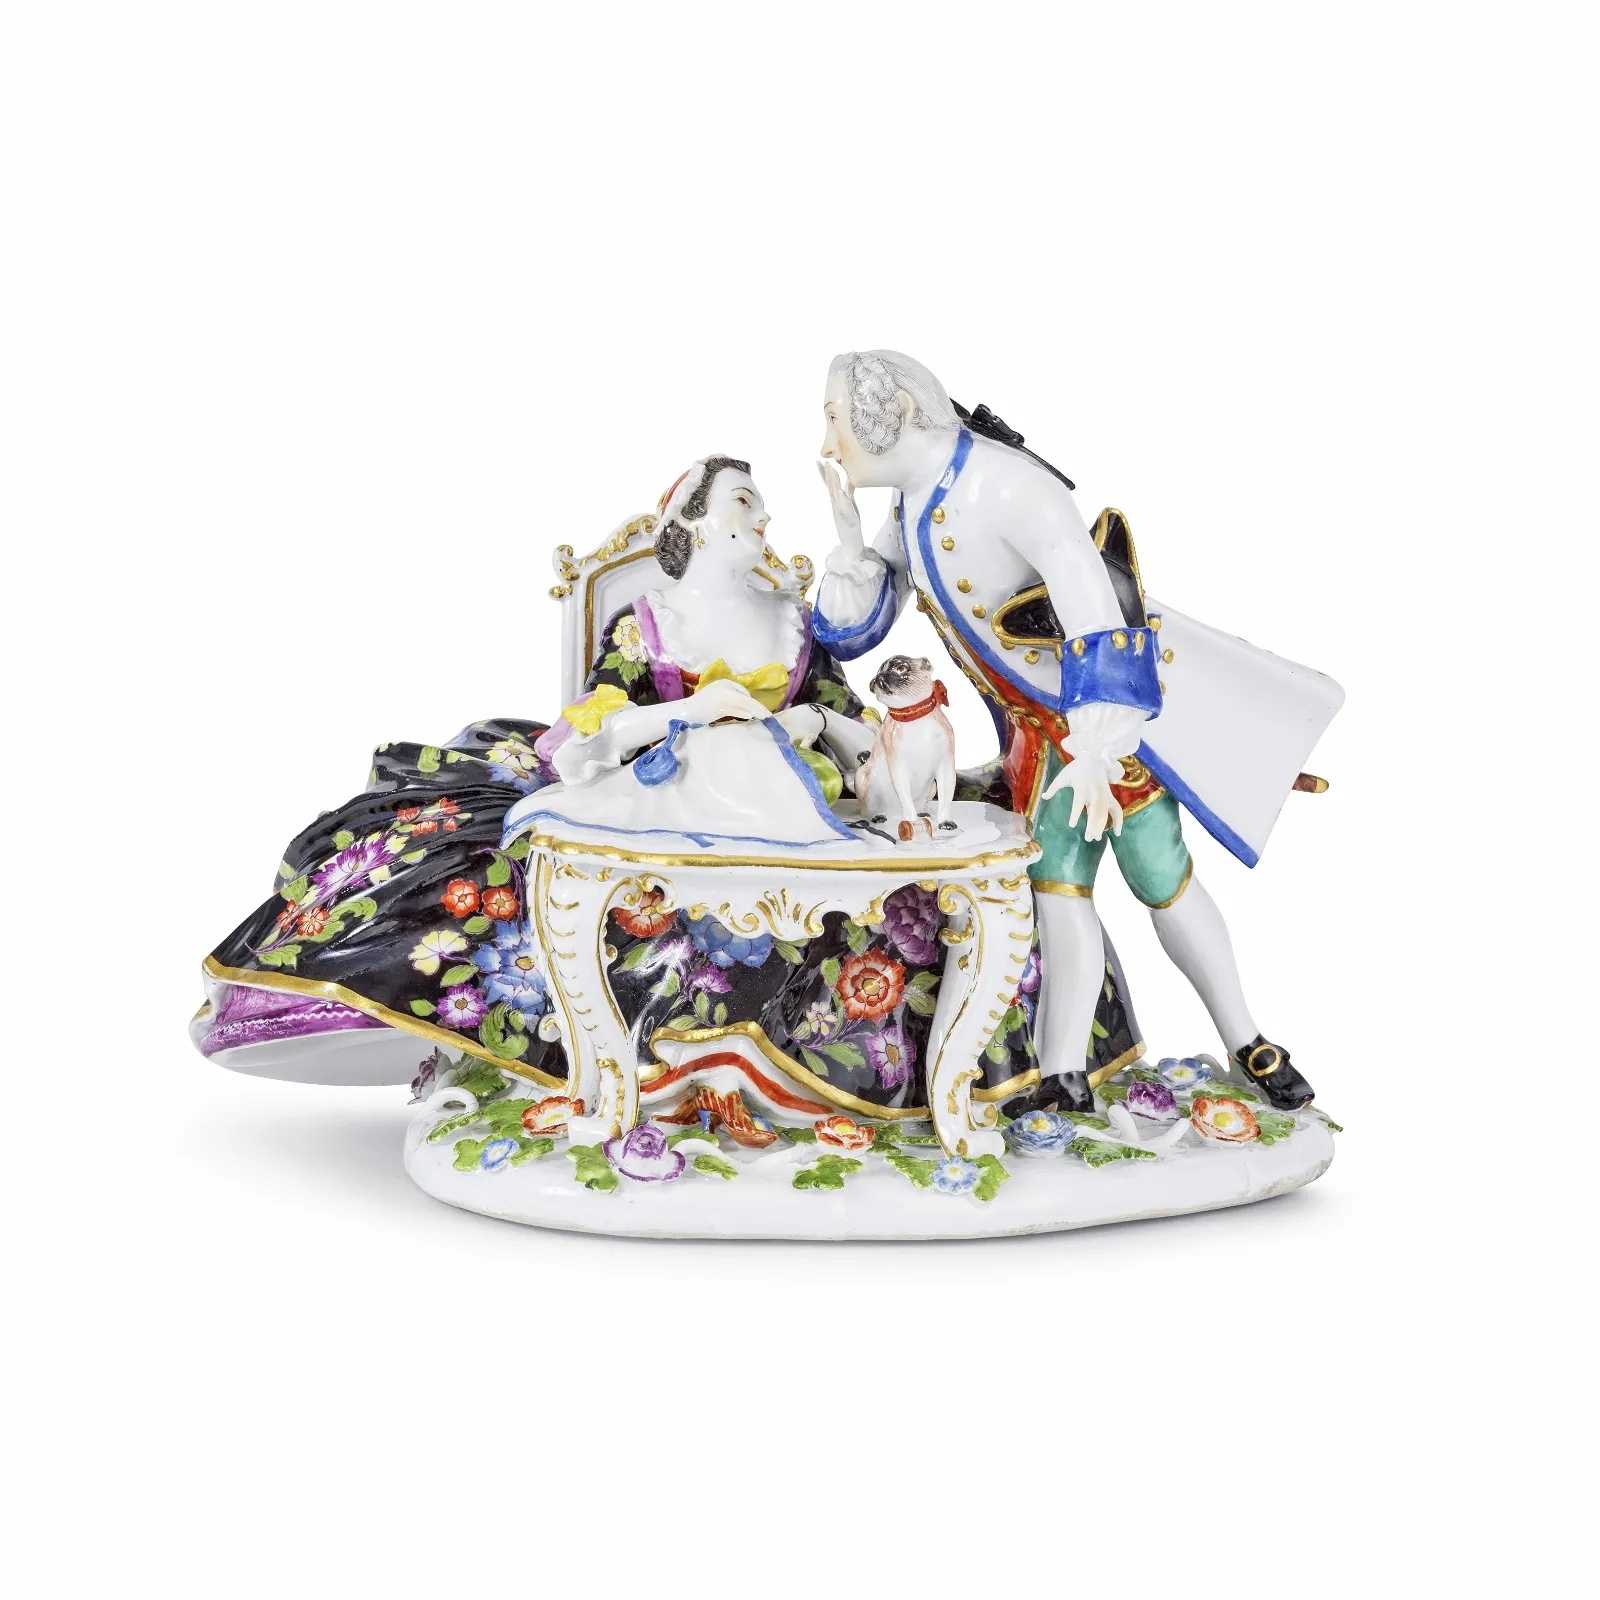 

Circa-1745 Meissen masonic crinoline group of lovers by Kaendler, which sold for €74,930 ($80,170) with buyer’s premium at Bonhams Paris.
